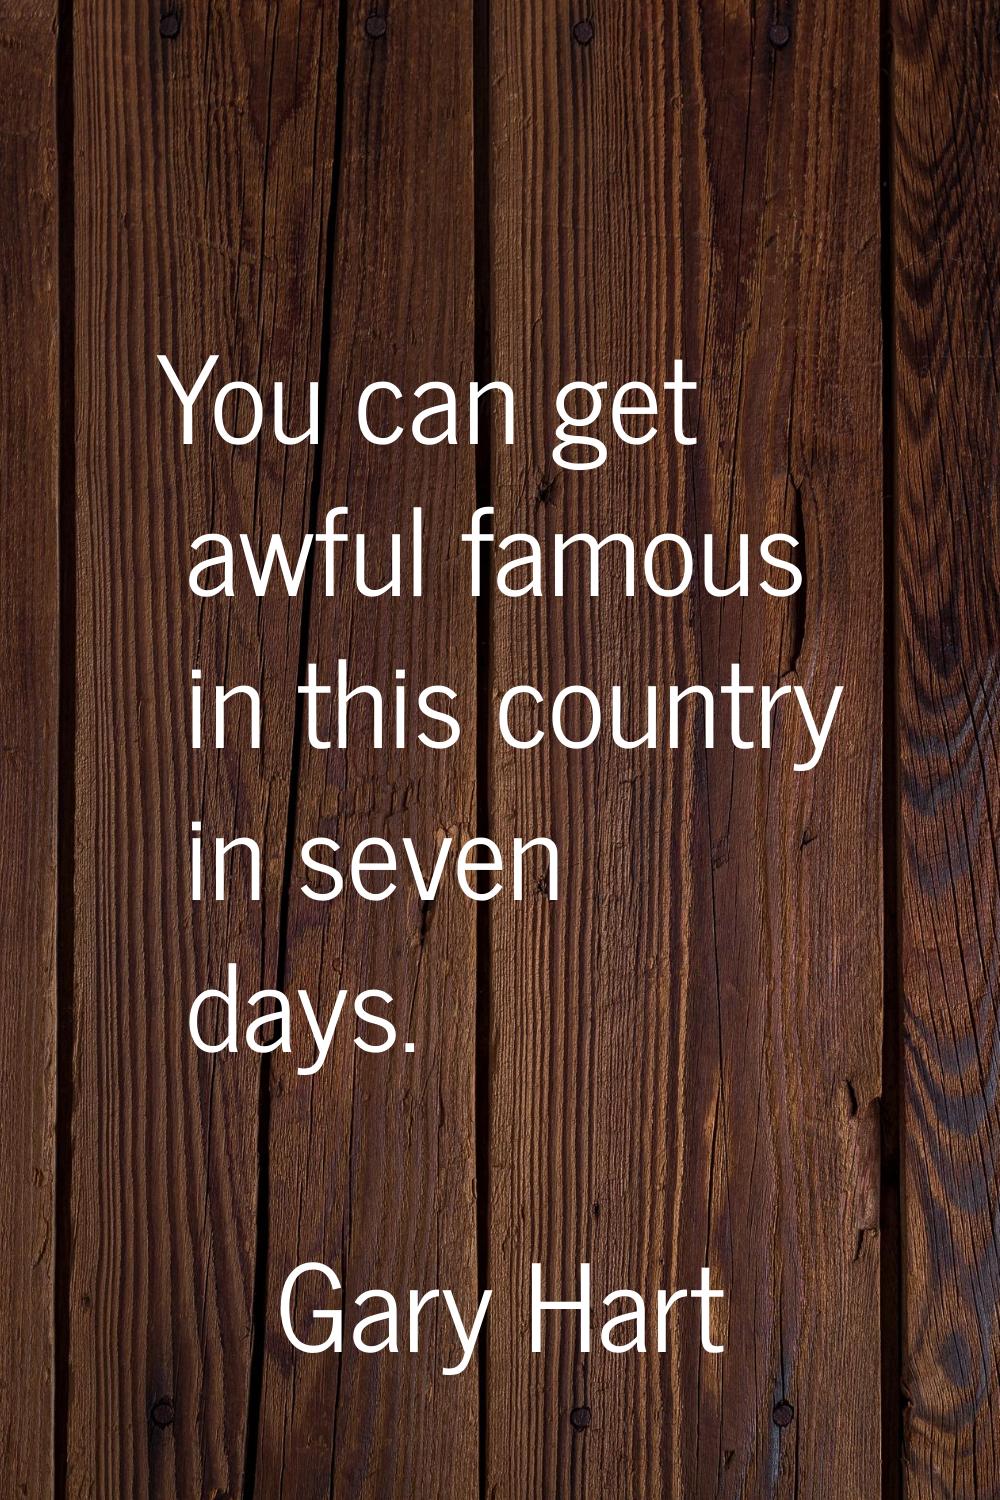 You can get awful famous in this country in seven days.